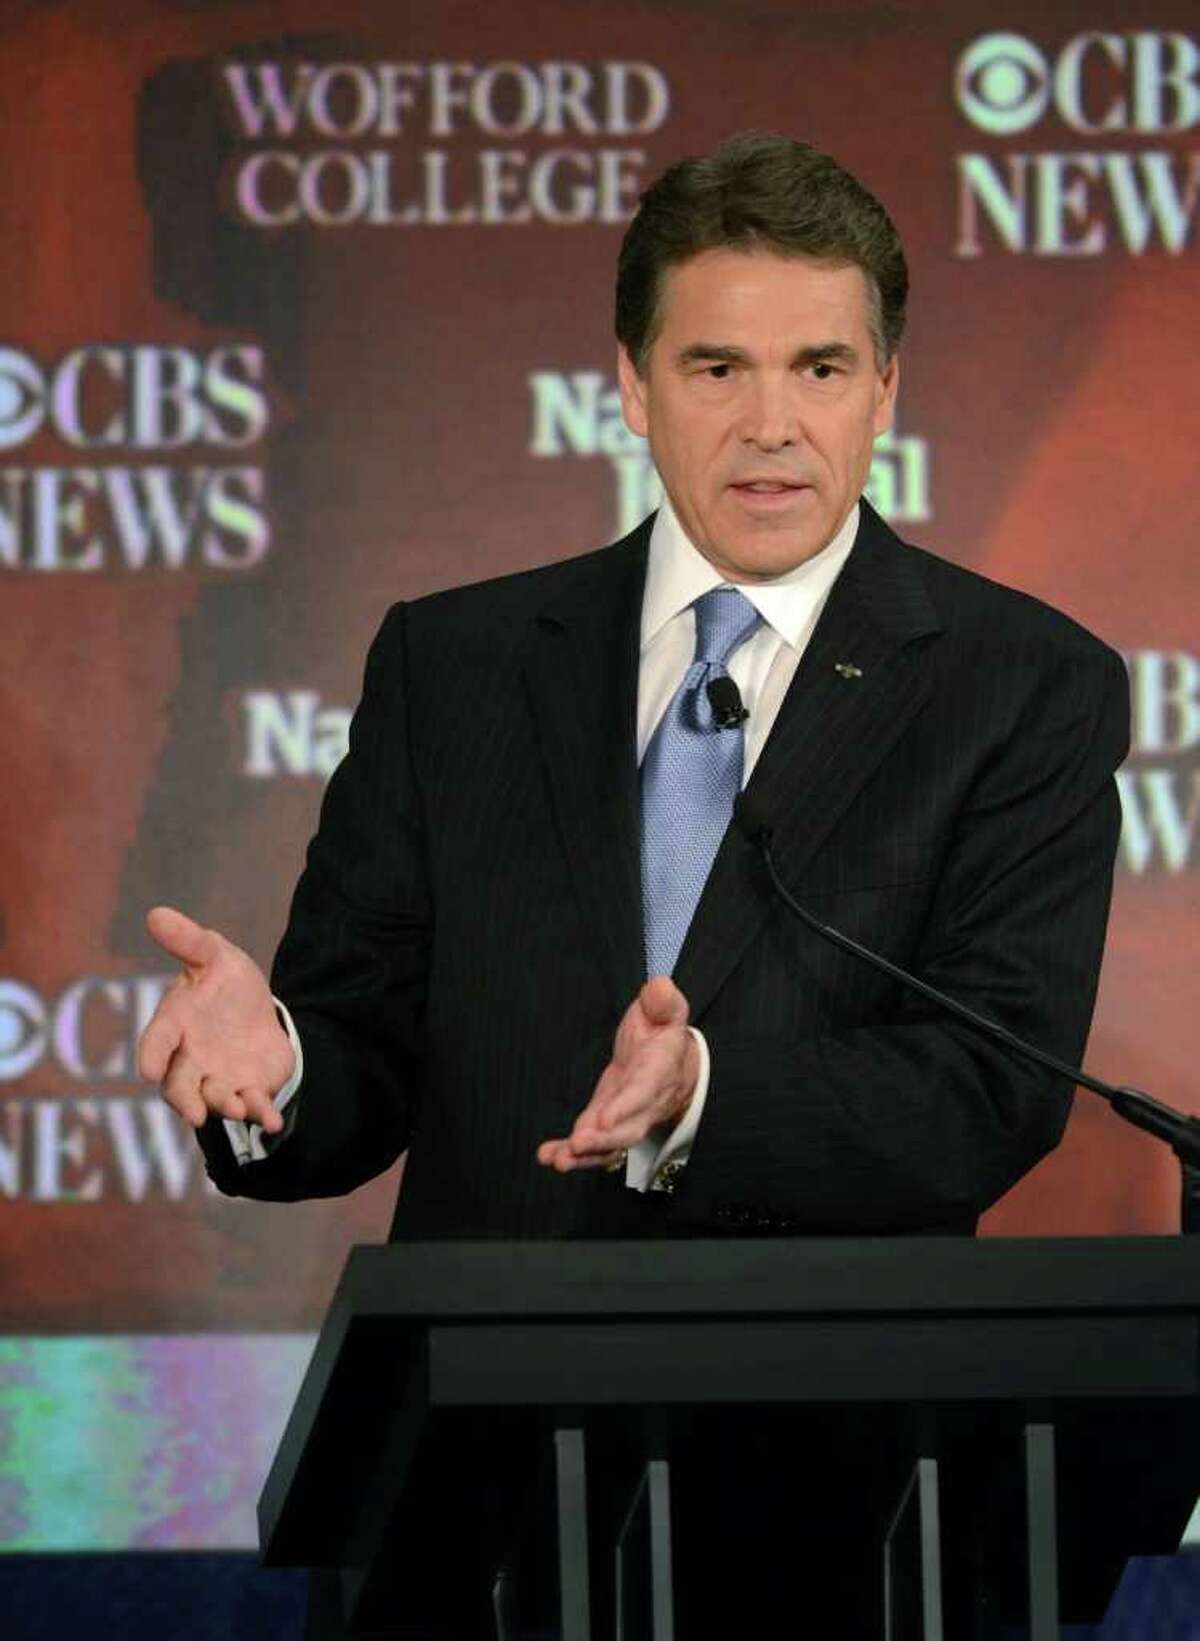 Republican presidential candidate Rick Perry, Texas Governor, speaks at the CBS News/National Journal foreign policy debate at the Benjamin Johnson Arena, Saturday, Nov. 12, 2011 in Spartanburg, S.C. The debate covered foreign policy, which has gotten little attention from the GOP candidates in recent weeks. During the debate Perry joked about his gaffe from a debate four days ago, when he forgot the third Cabinet department he would eliminate if elected president.